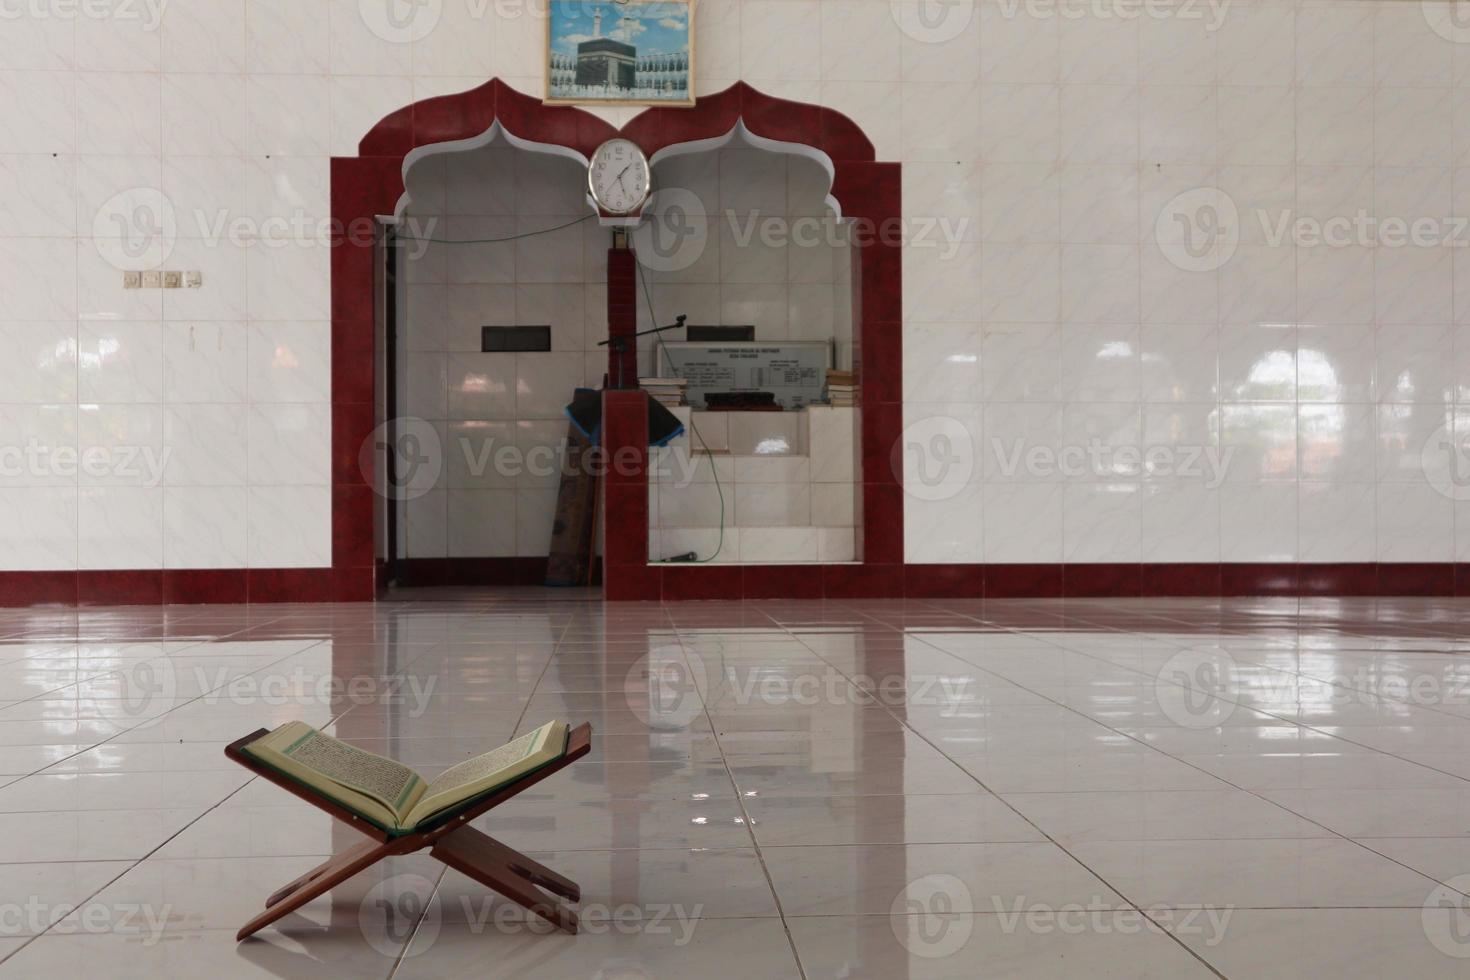 Koran or Quran in the mosque during the day photo